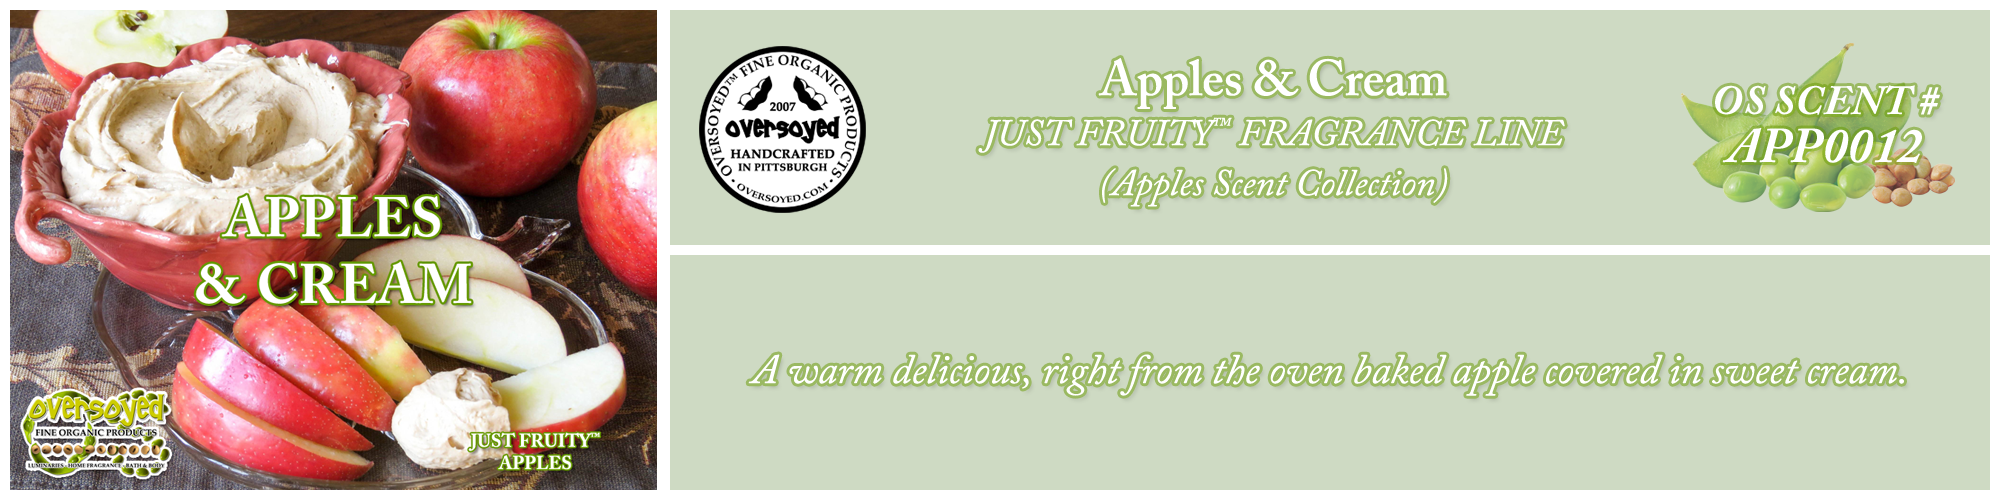 Apples & Cream Handcrafted Products Collection